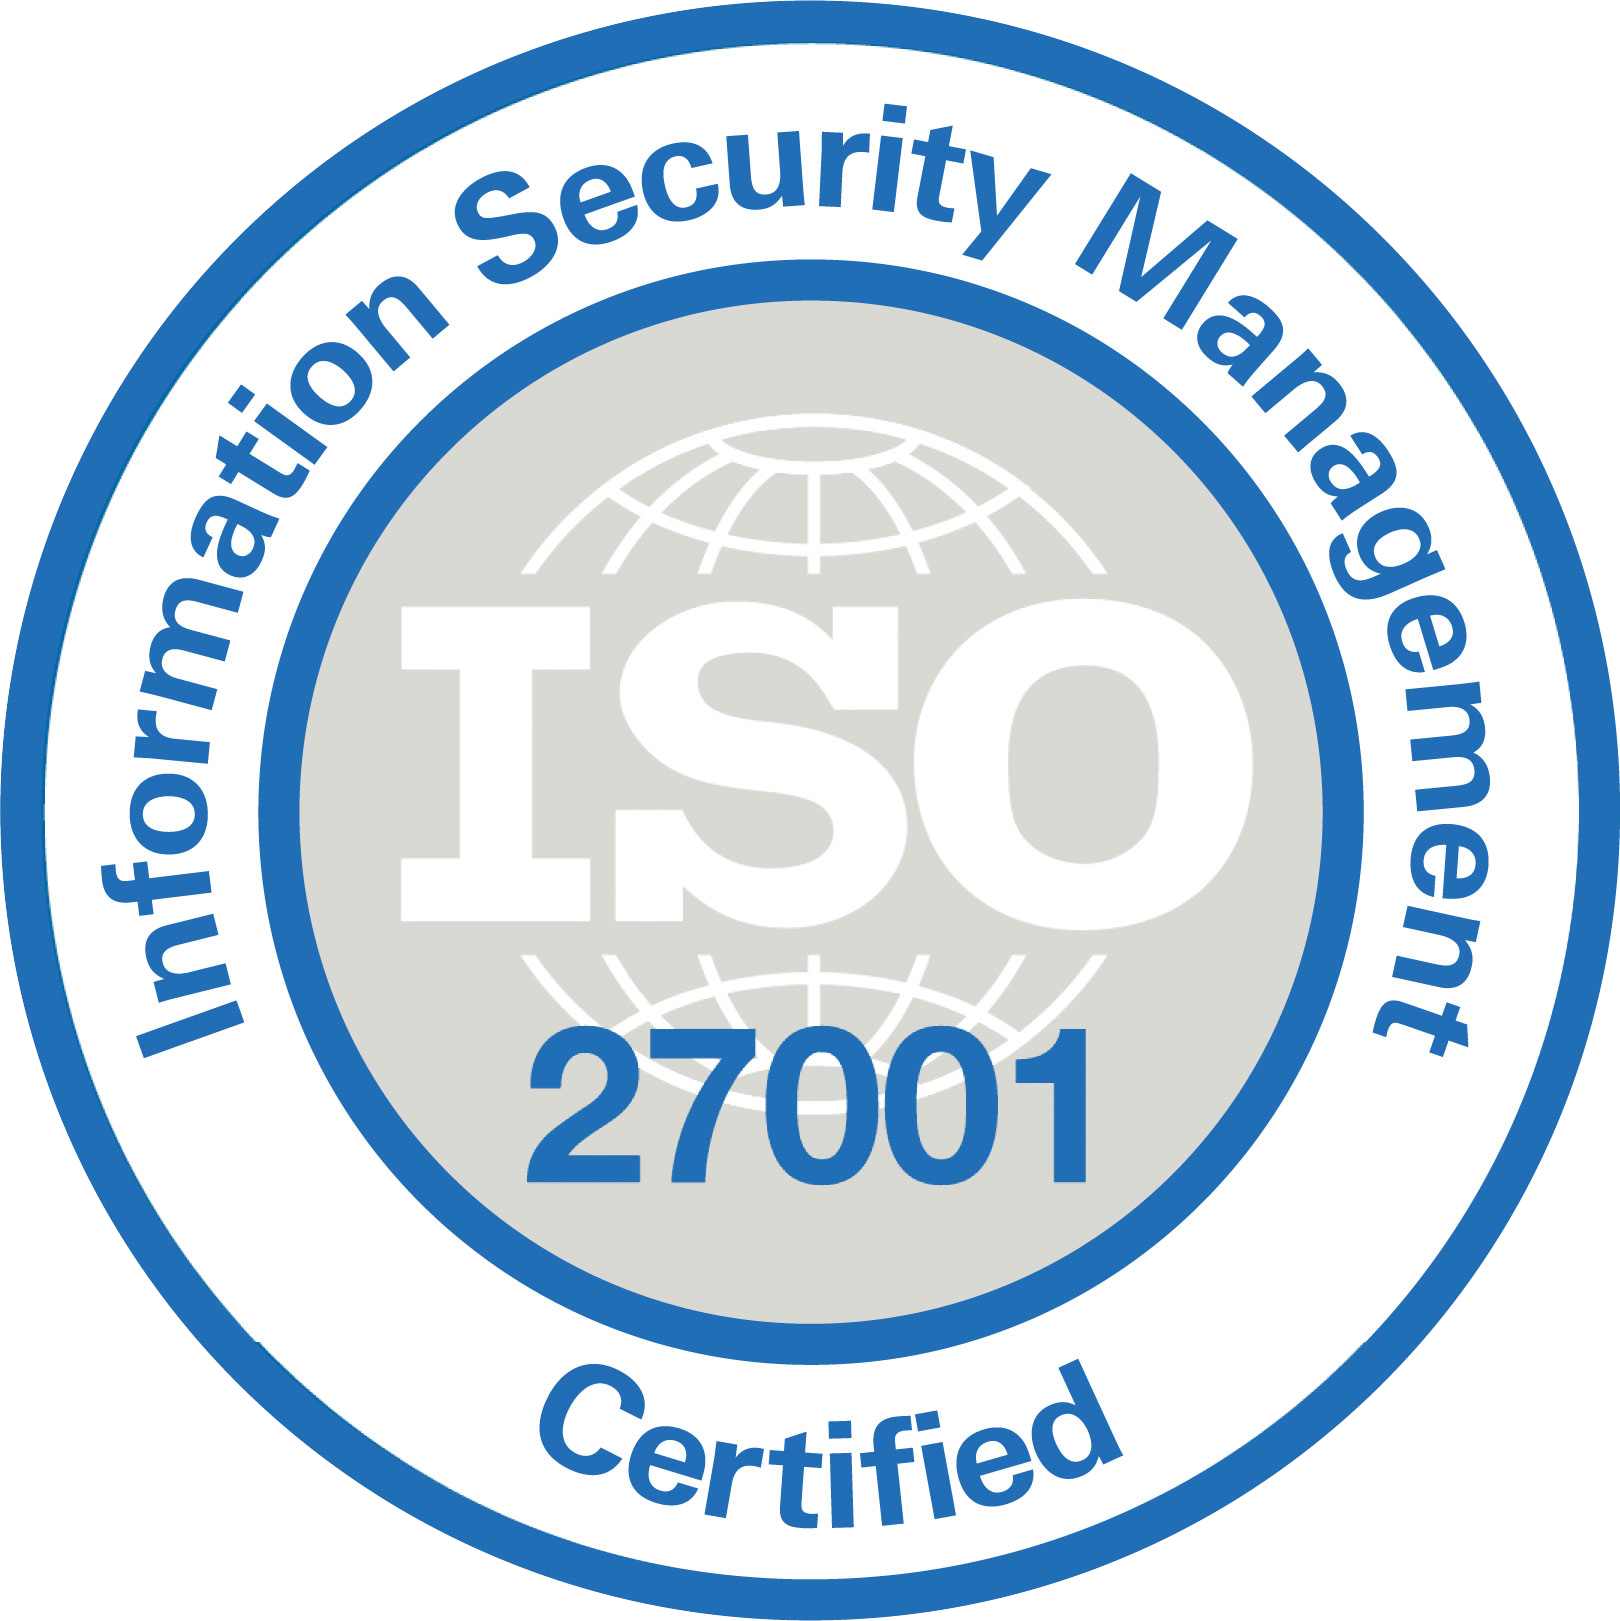 Information Security Management ISO 27001